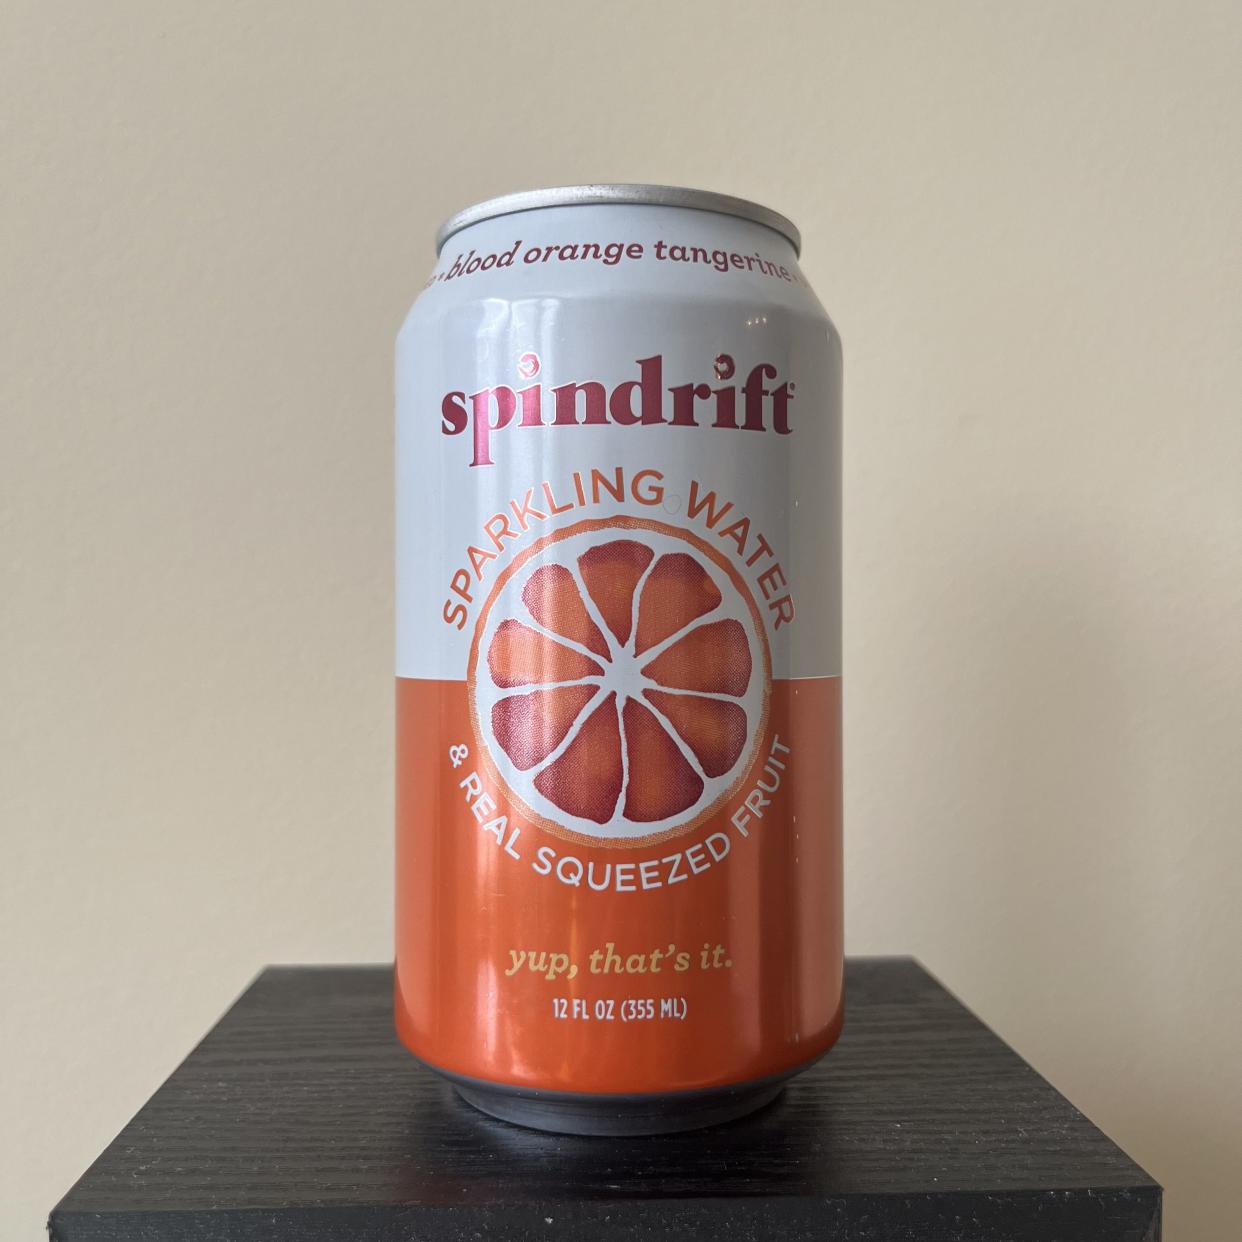 a can of spindrift blood orange tangerine